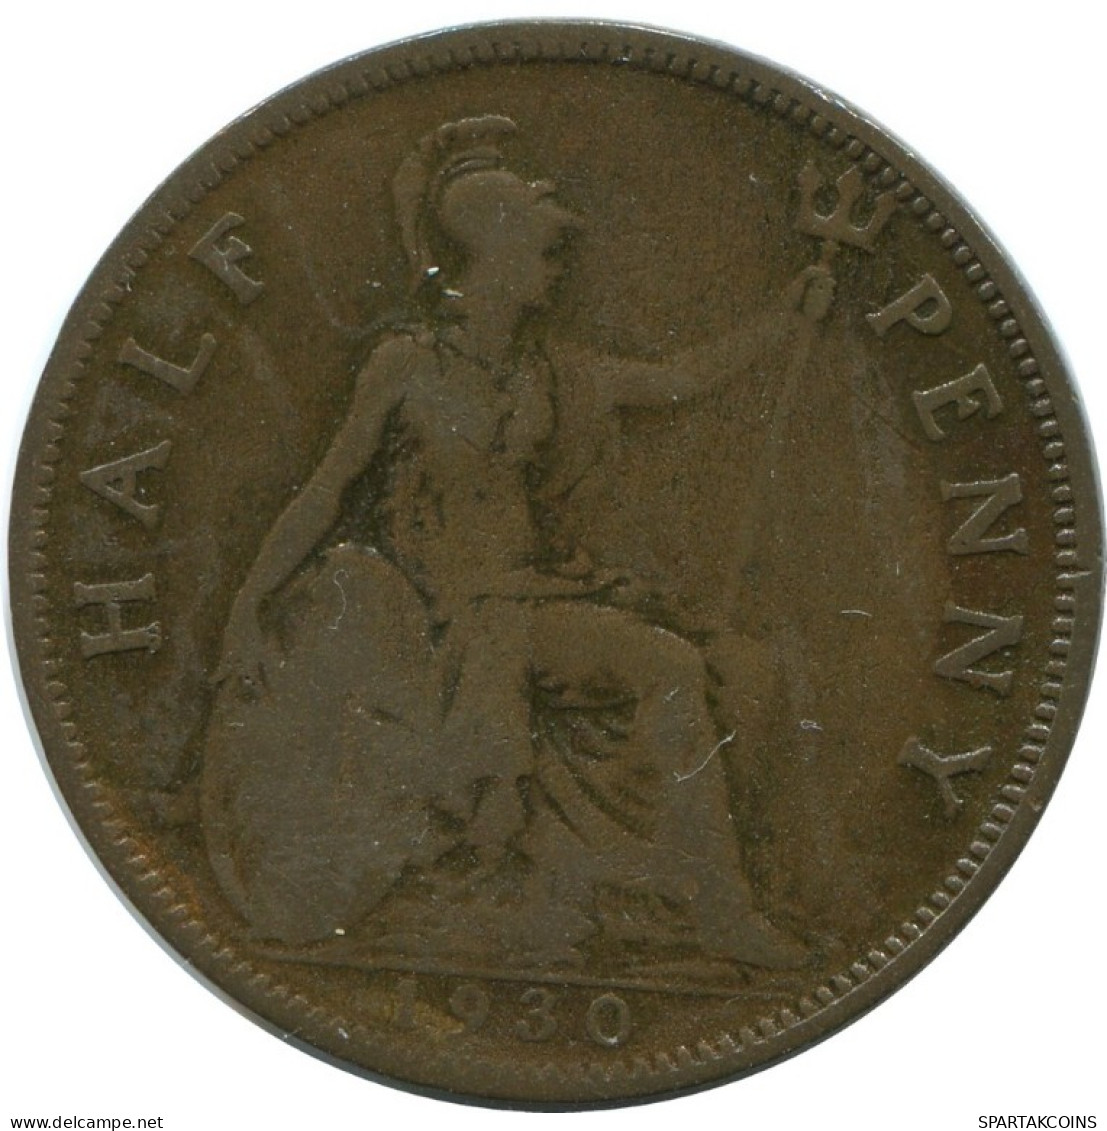 HALF PENNY 1930 UK GREAT BRITAIN Coin #AG806.1.U.A - C. 1/2 Penny